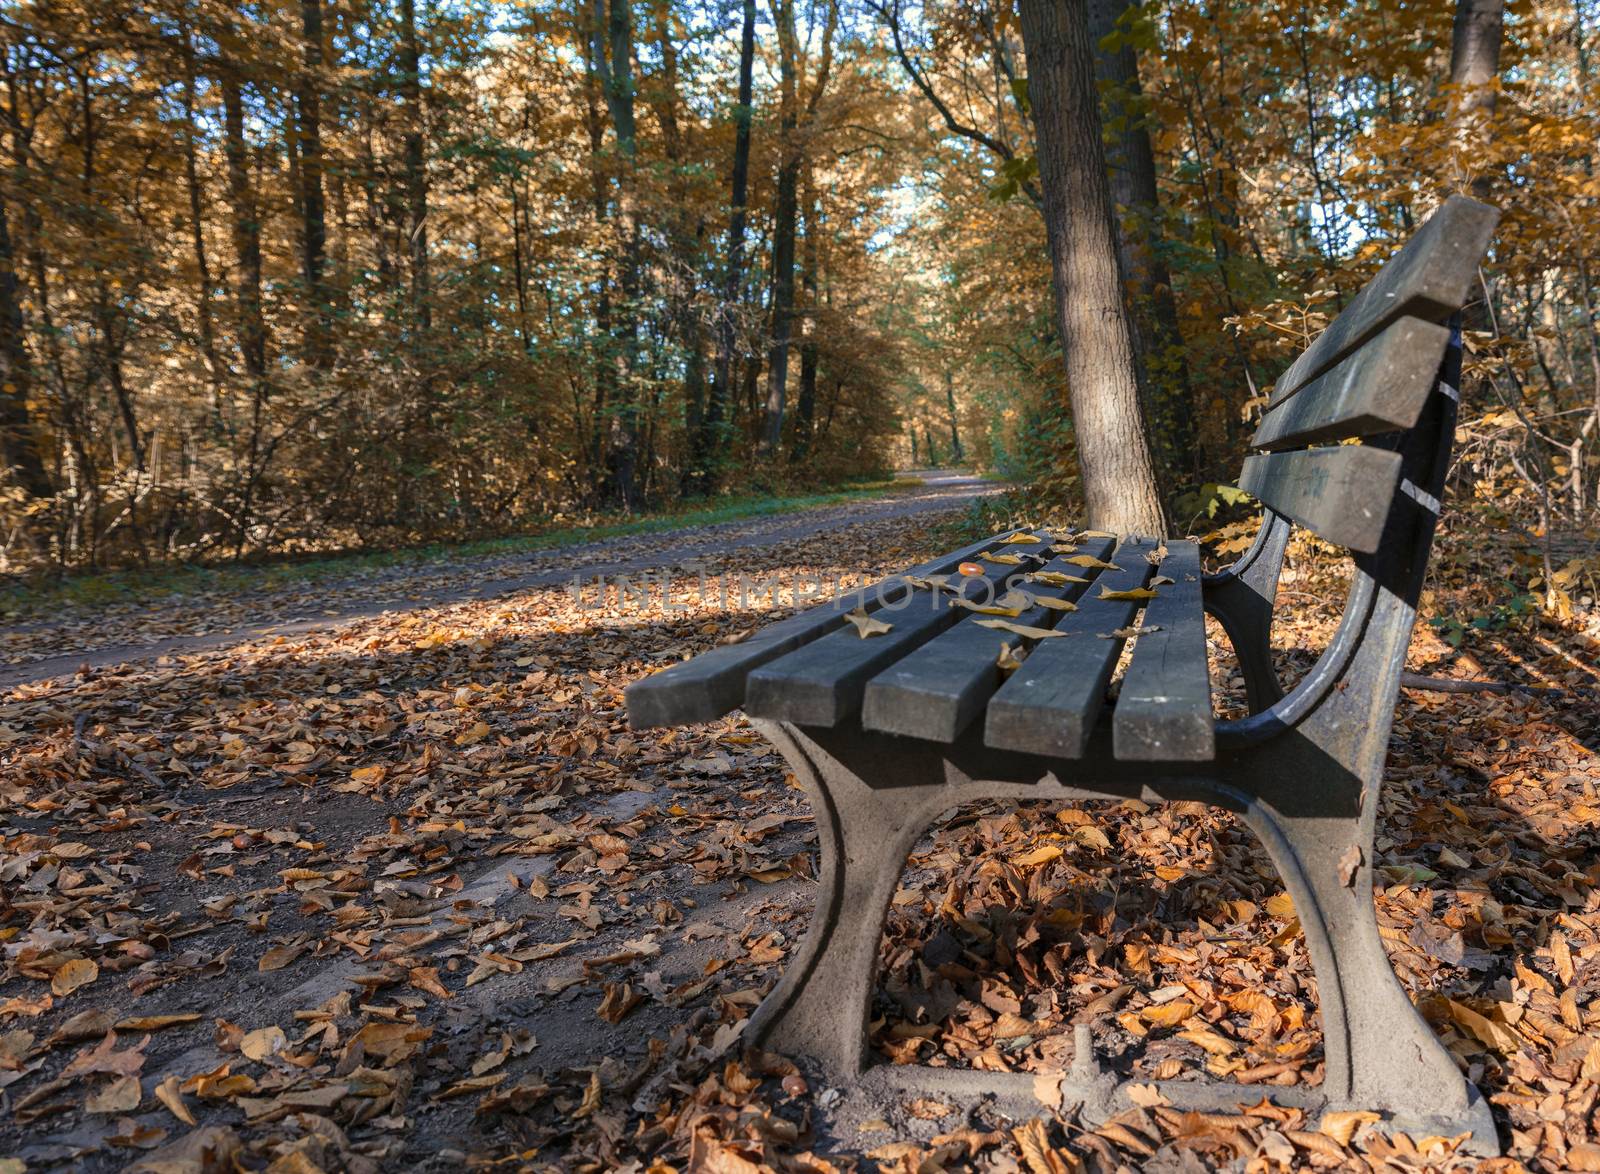 Bench and oak tree in city park in the autumn